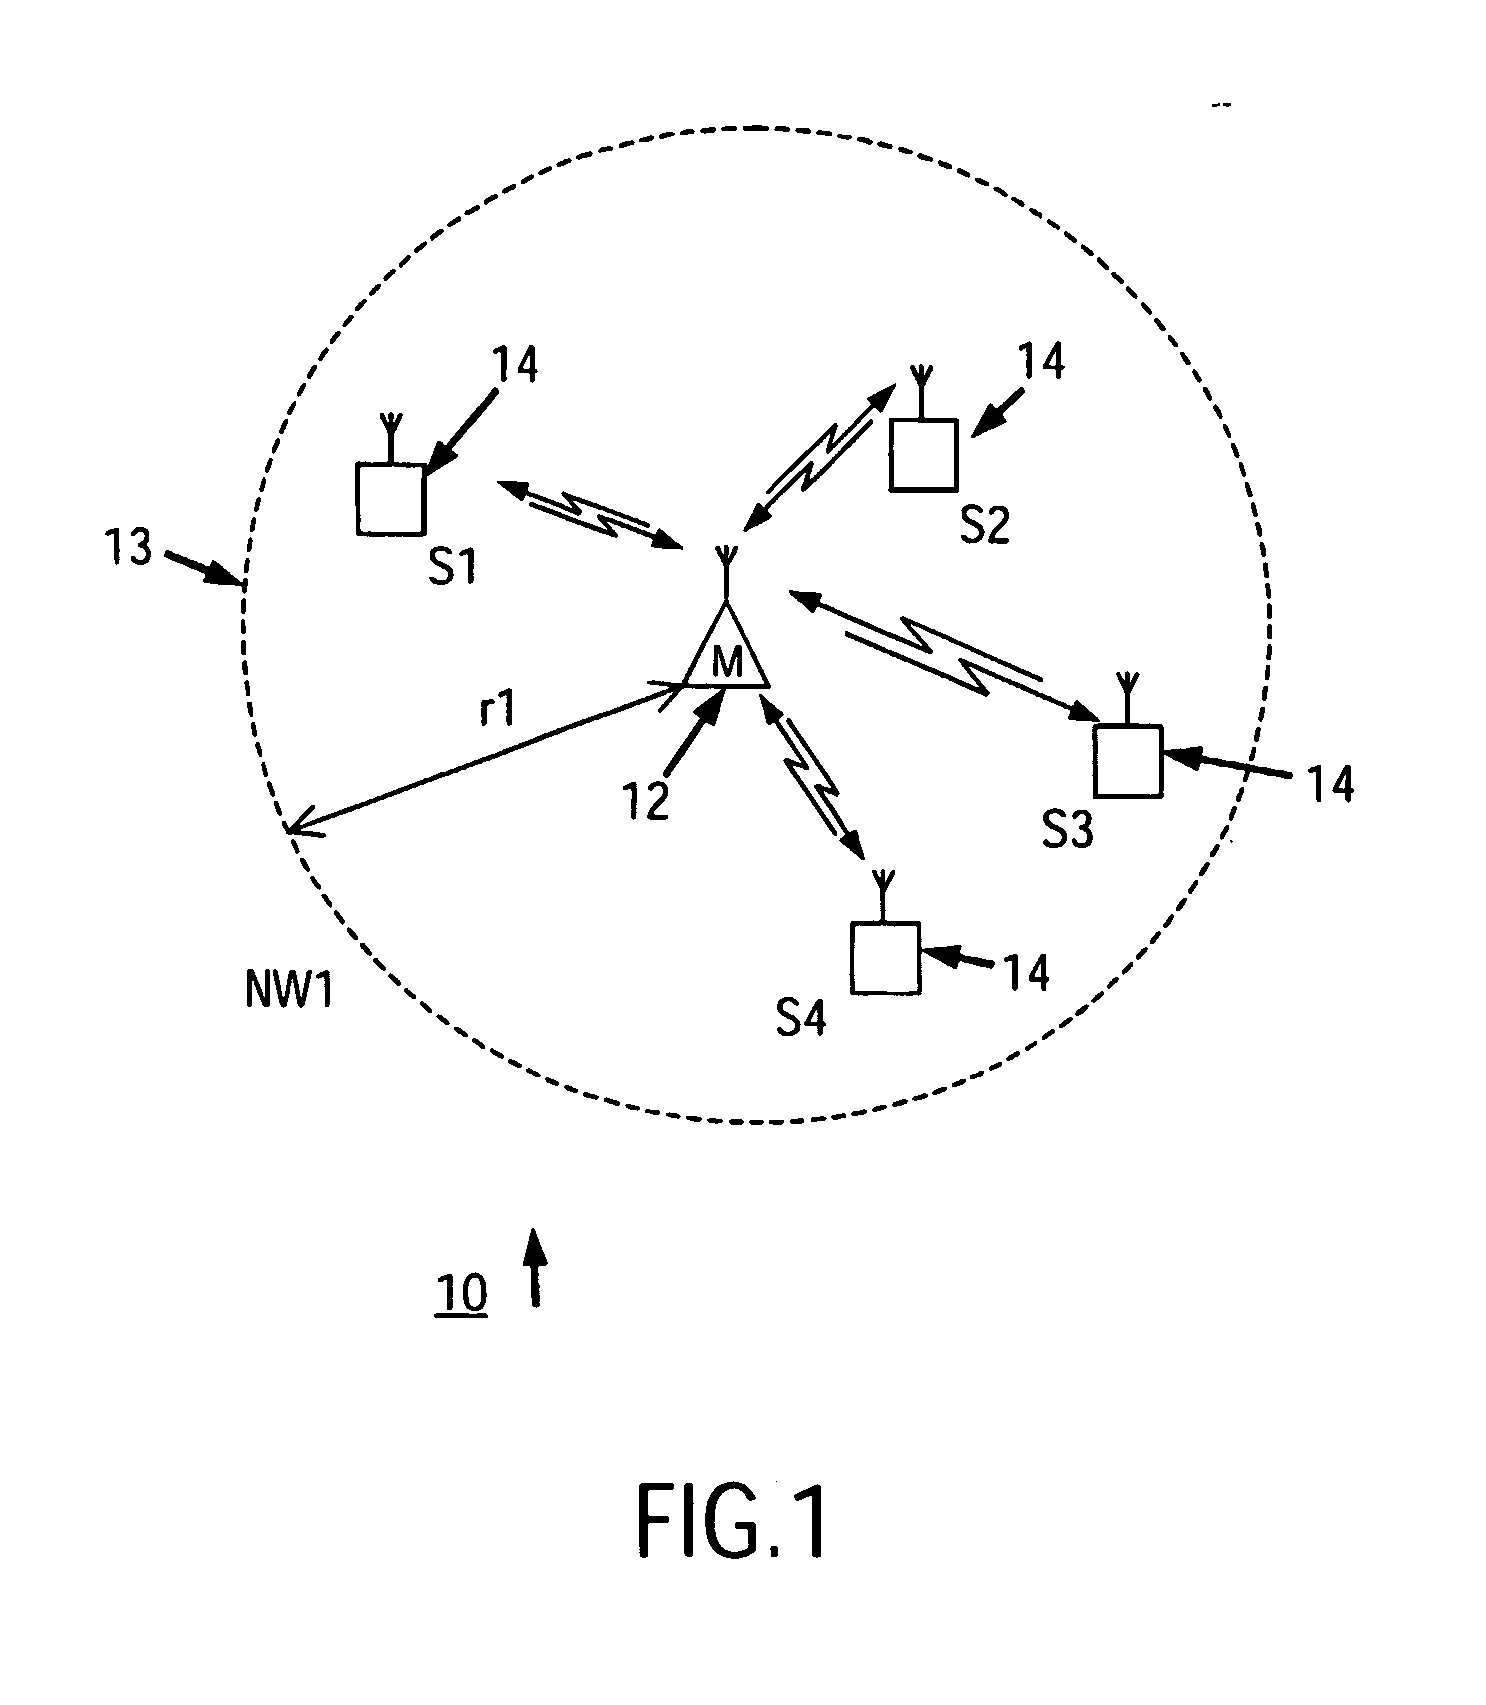 Communication system with an extended coverage area